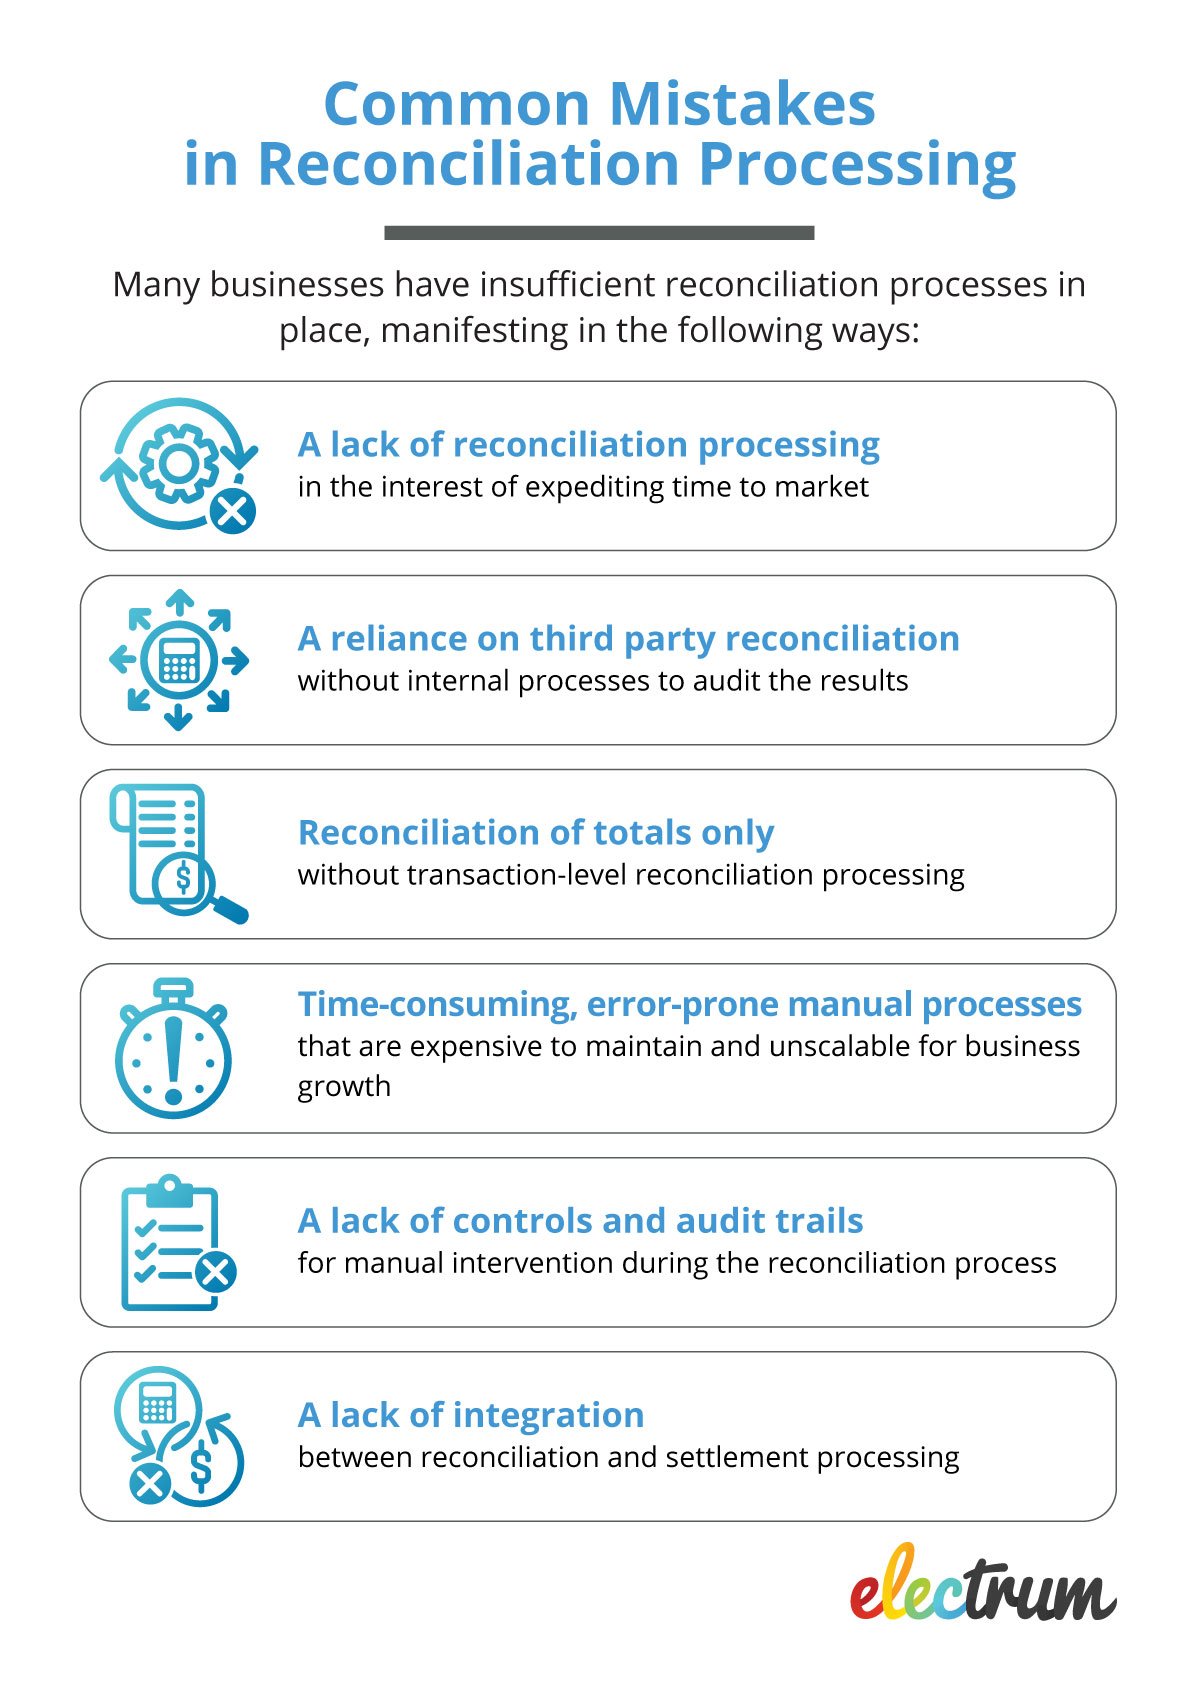 A list of six common mistakes that businesses make when it comes to reconciliation processing